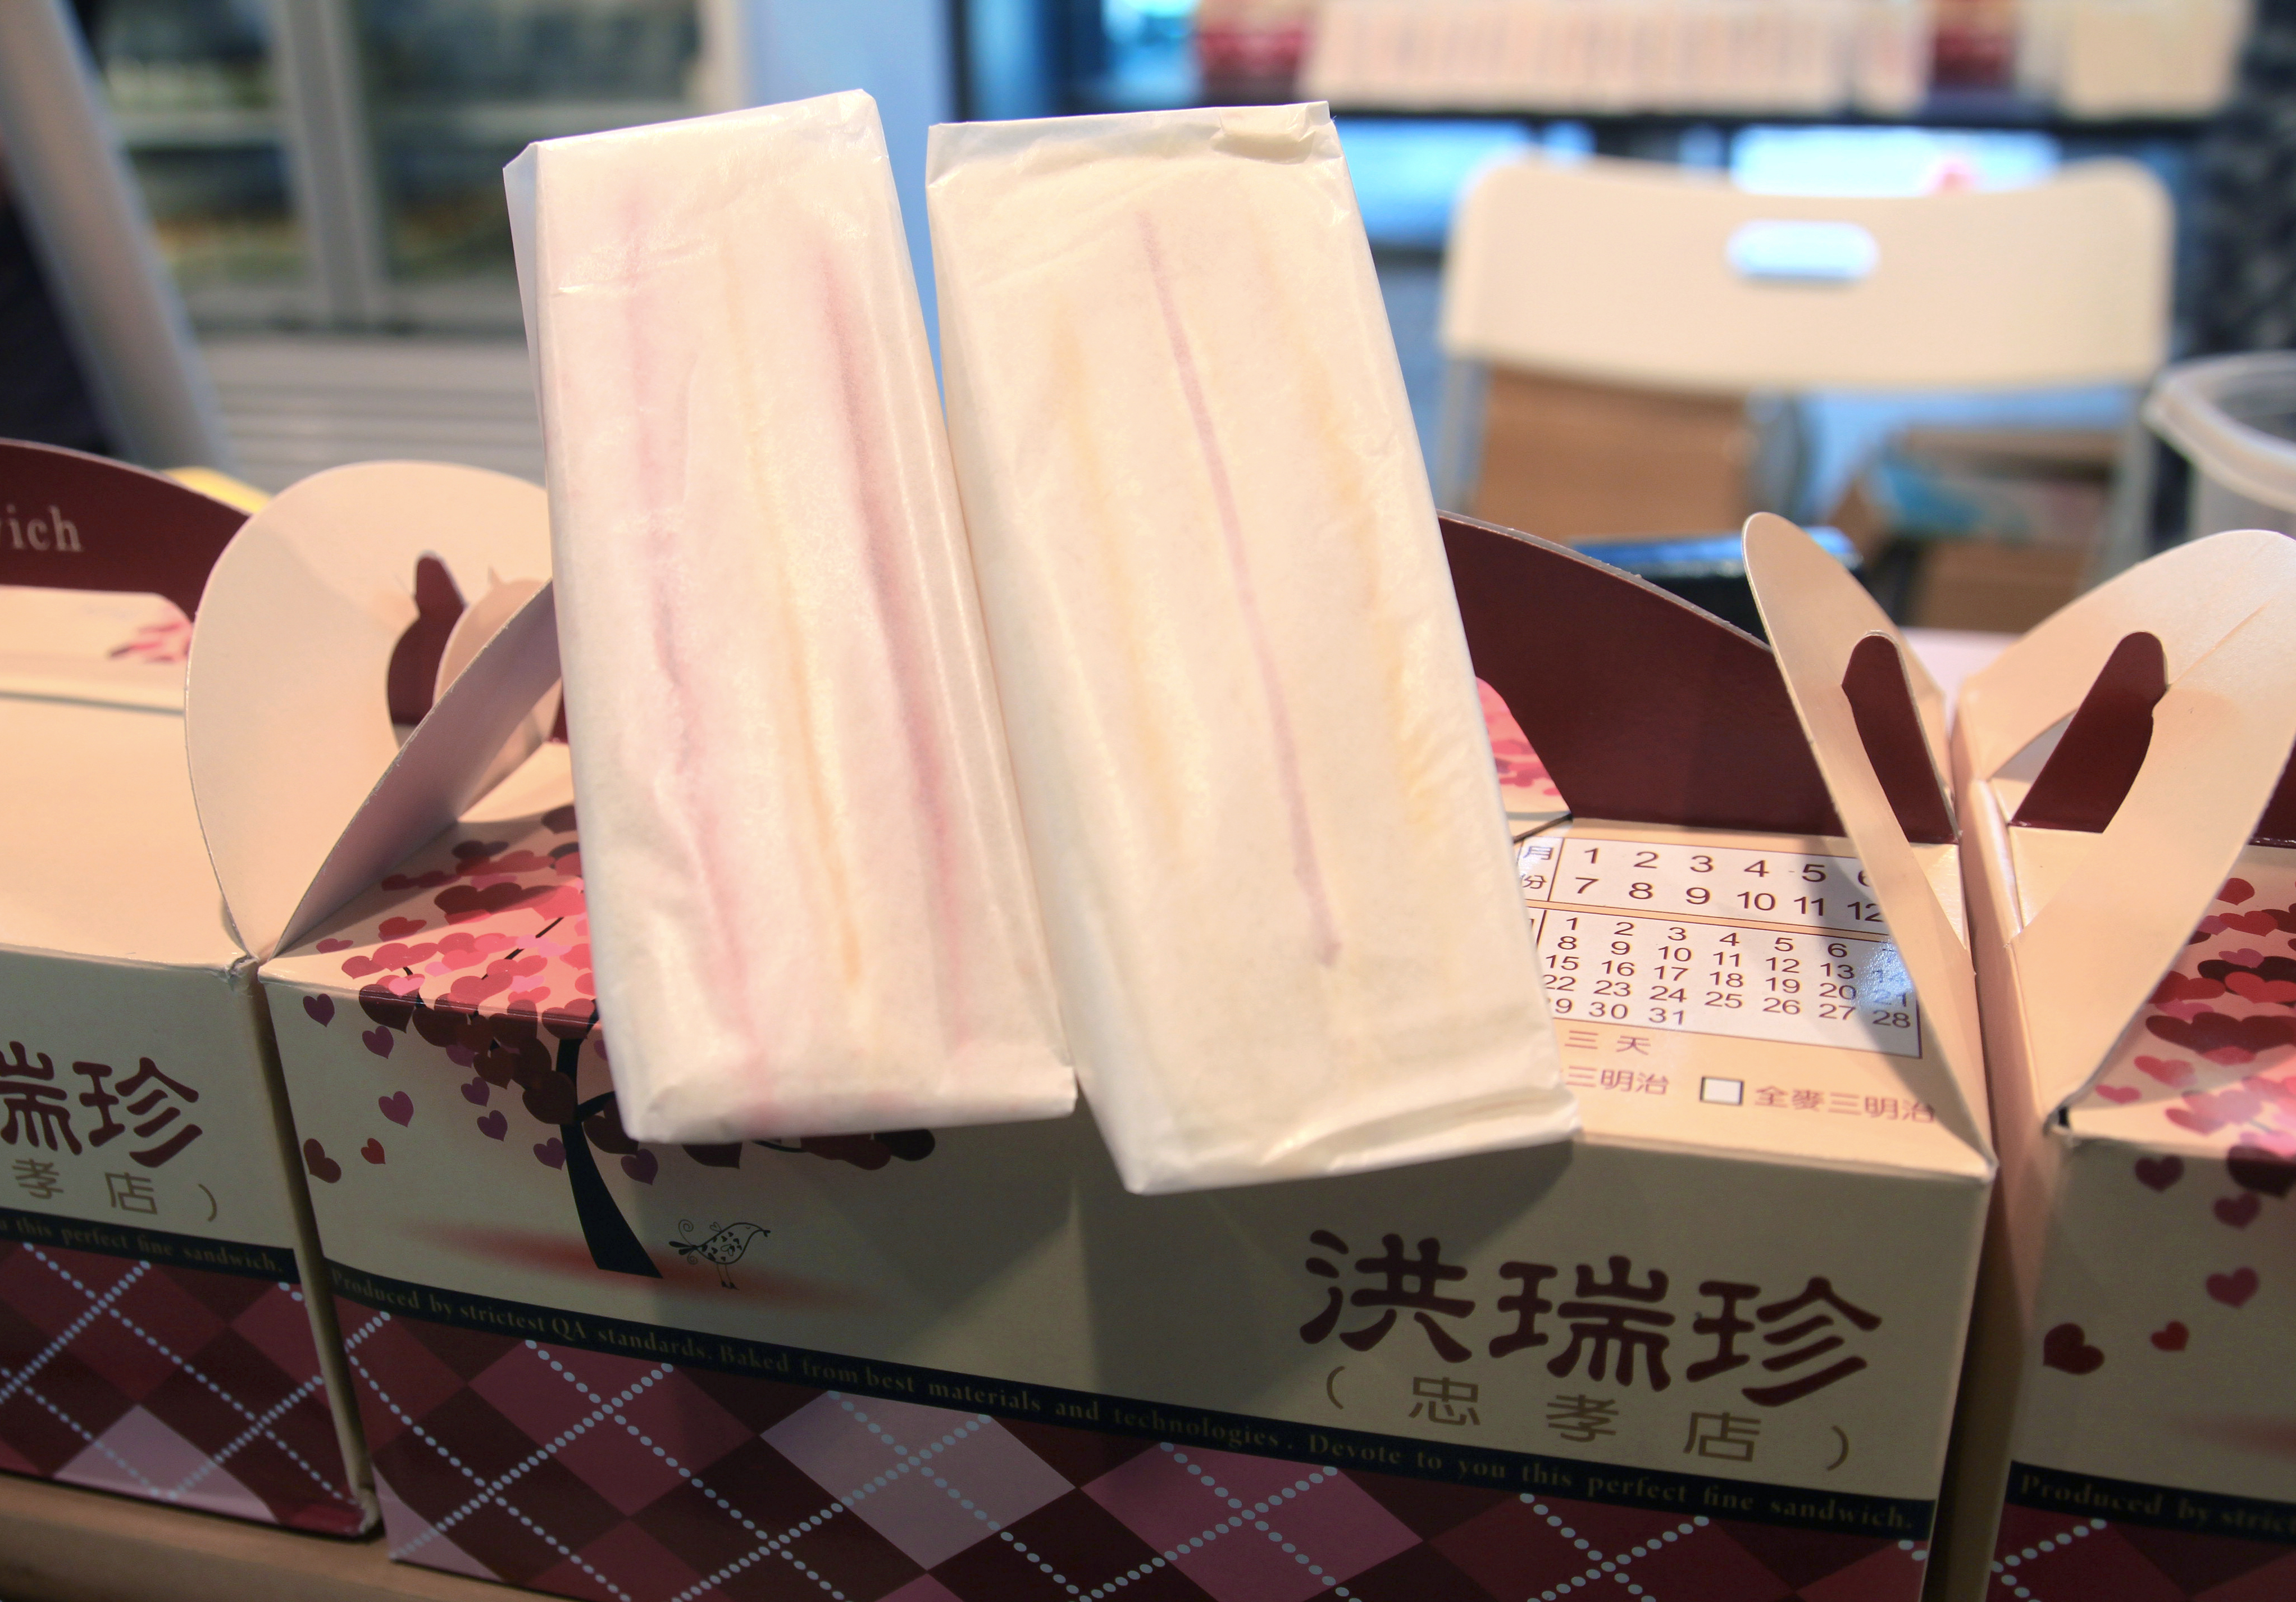 The sandwiches have been taken off the shelves. Photo: SCMP Pictures